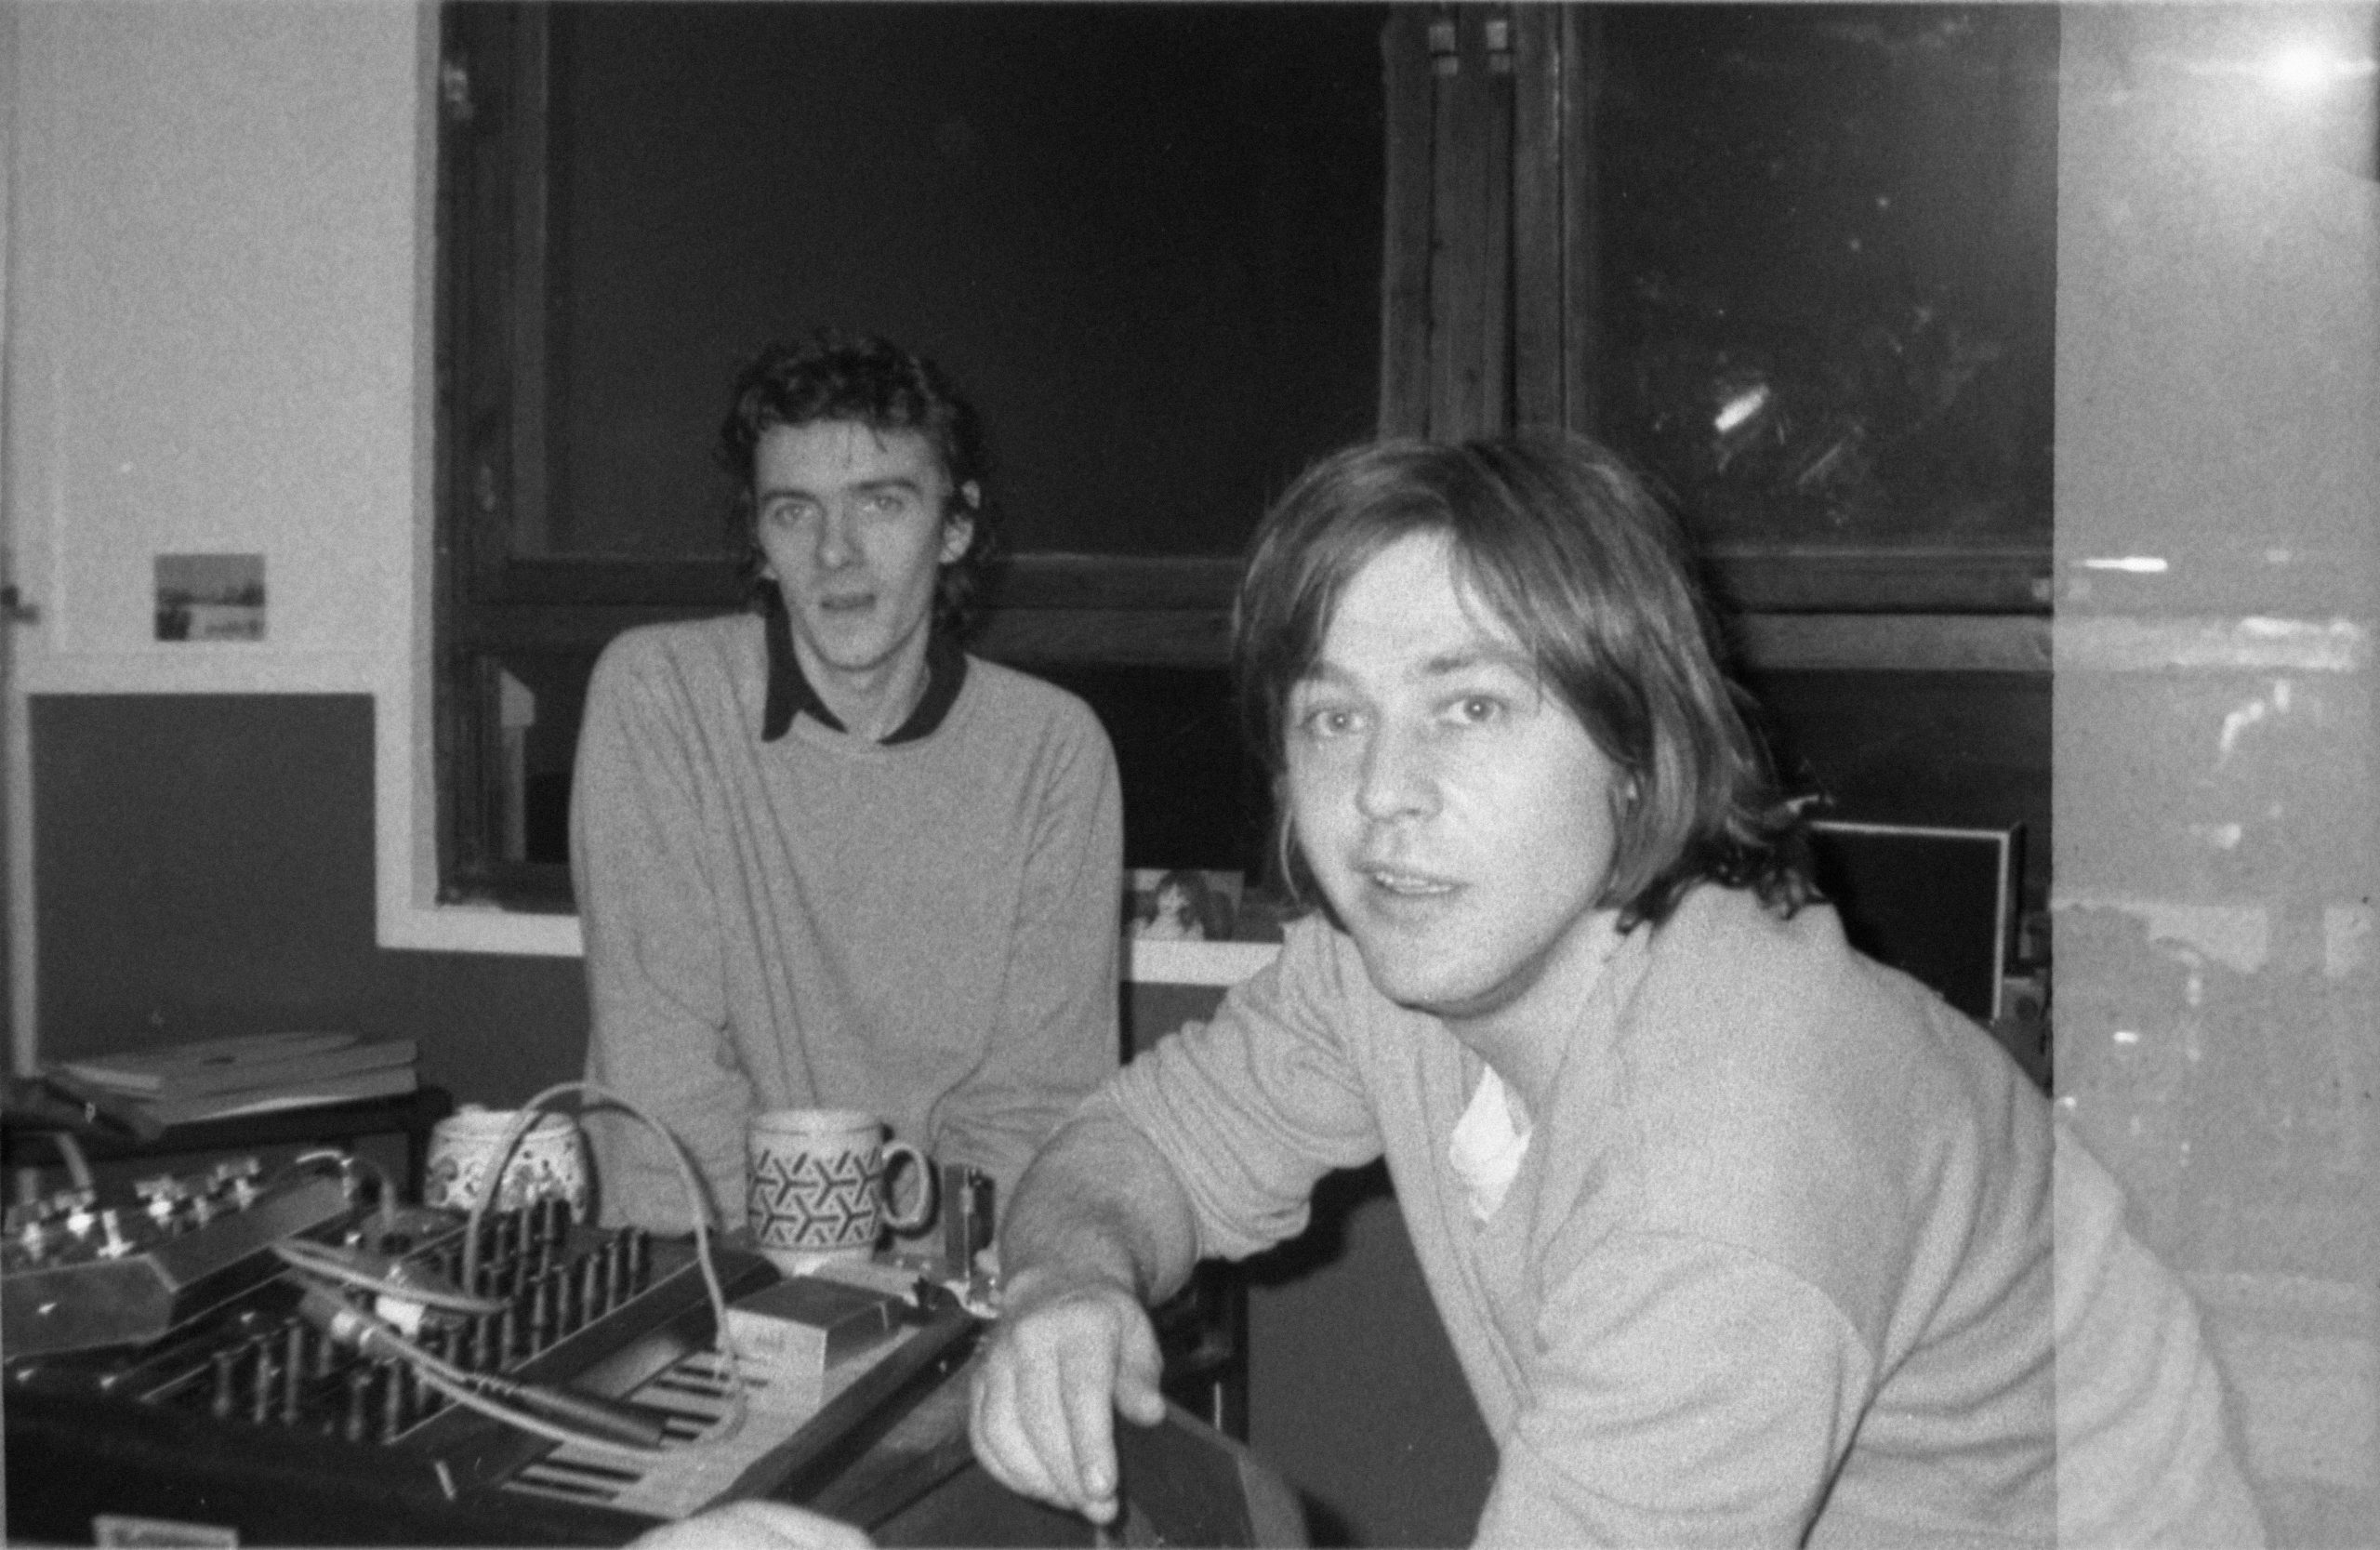 Orkaan Caius Gelach News: Thomas Leer and Robert Rental's cult punk-electro classic 'The Bridge'  gets a reissue in January; hear 'Monochrome Days' – Backseat Mafia